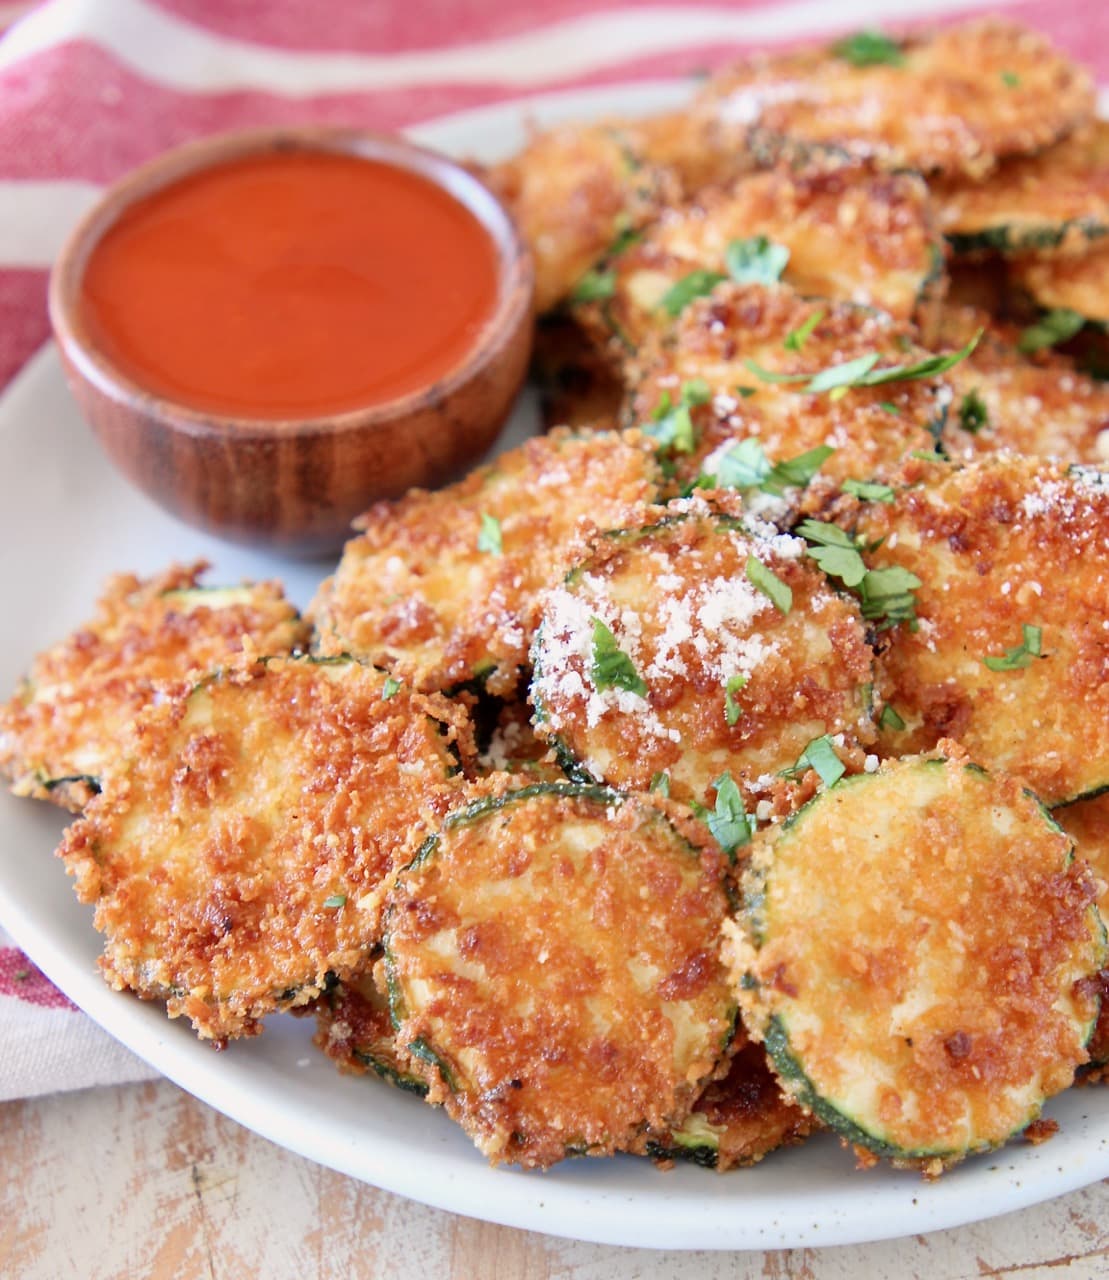 Crispy fried zucchini chips with parmesan cheese on a plate with small wooden bowl of buffalo sauce